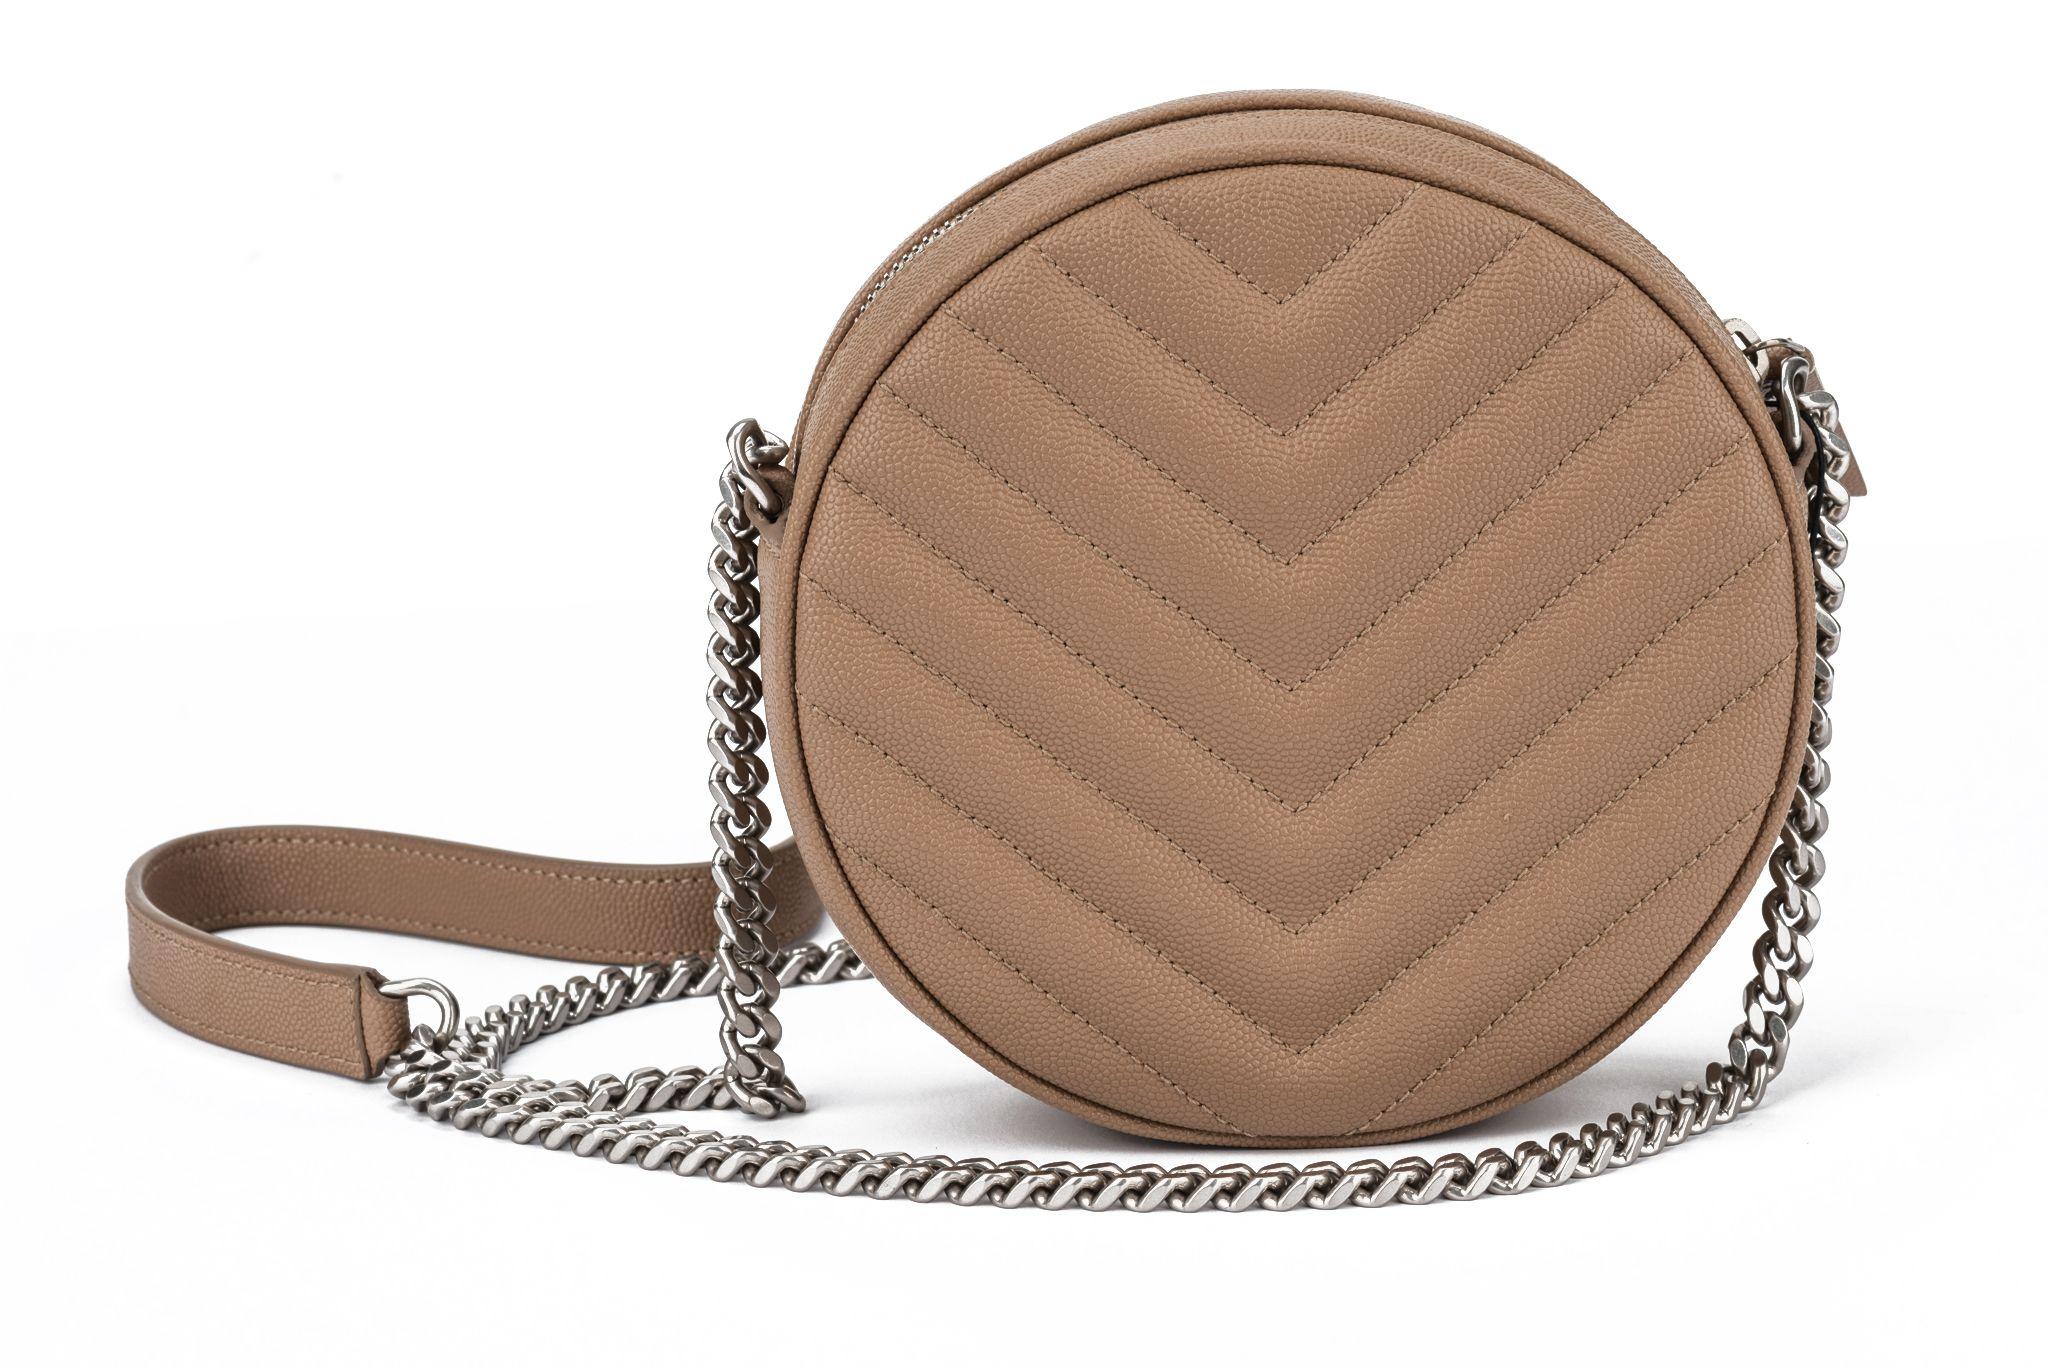 YSL brand new beige caviar round camera bag with silver tone hardware. Exterior signature YSL logo in the center. Zip around top closure .
Cross body shoulder strap measures 21